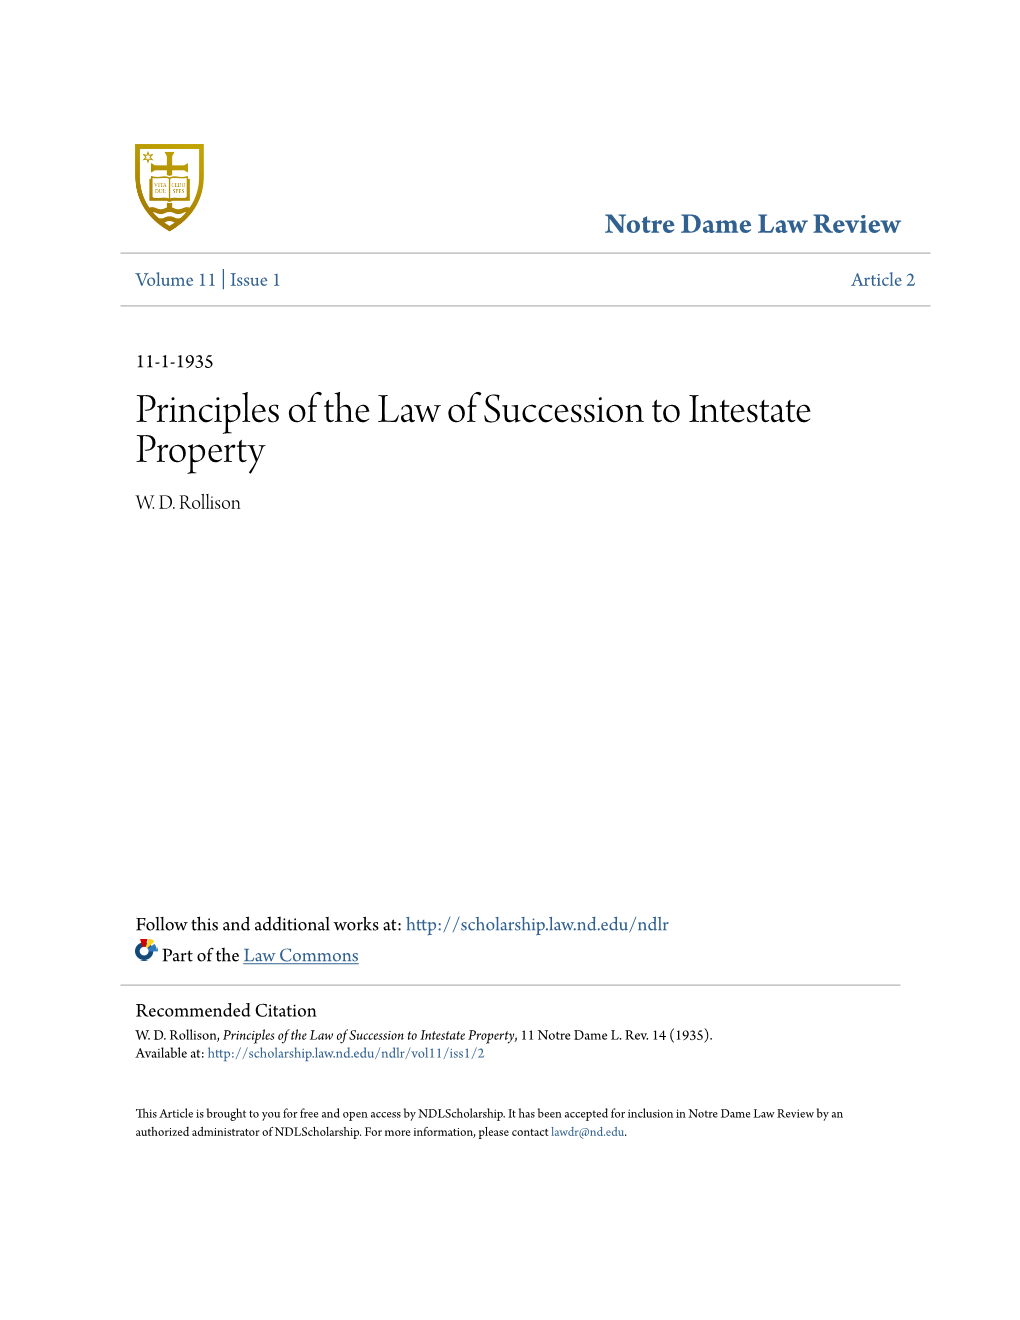 Principles of the Law of Succession to Intestate Property W